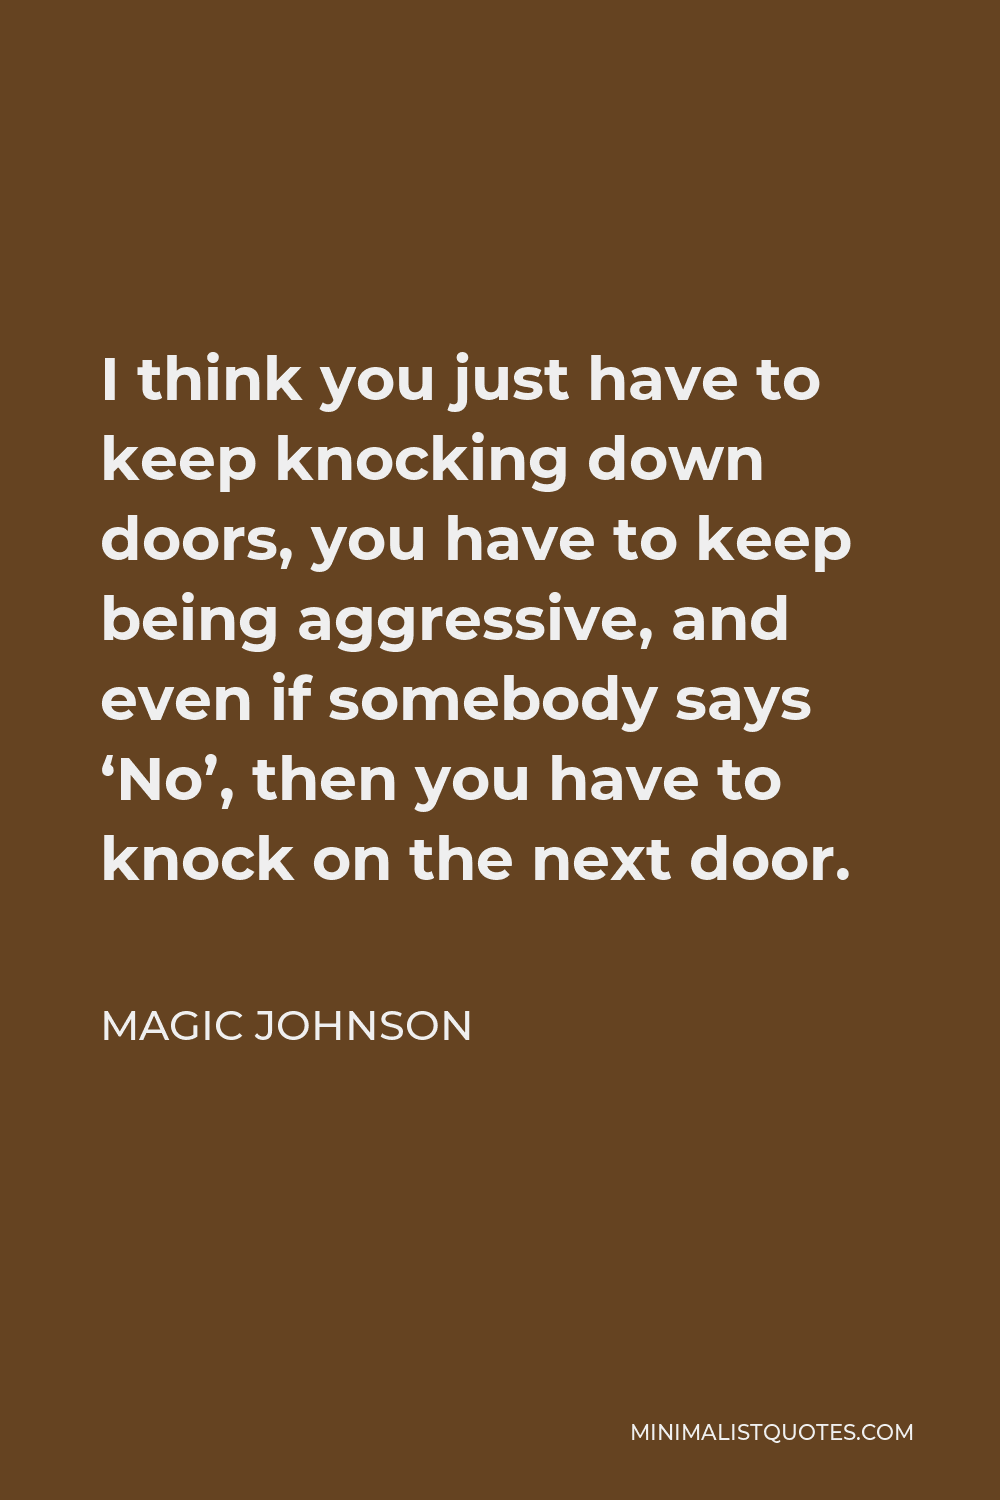 Magic Johnson Quote - I think you just have to keep knocking down doors, you have to keep being aggressive, and even if somebody says ‘No’, then you have to knock on the next door.